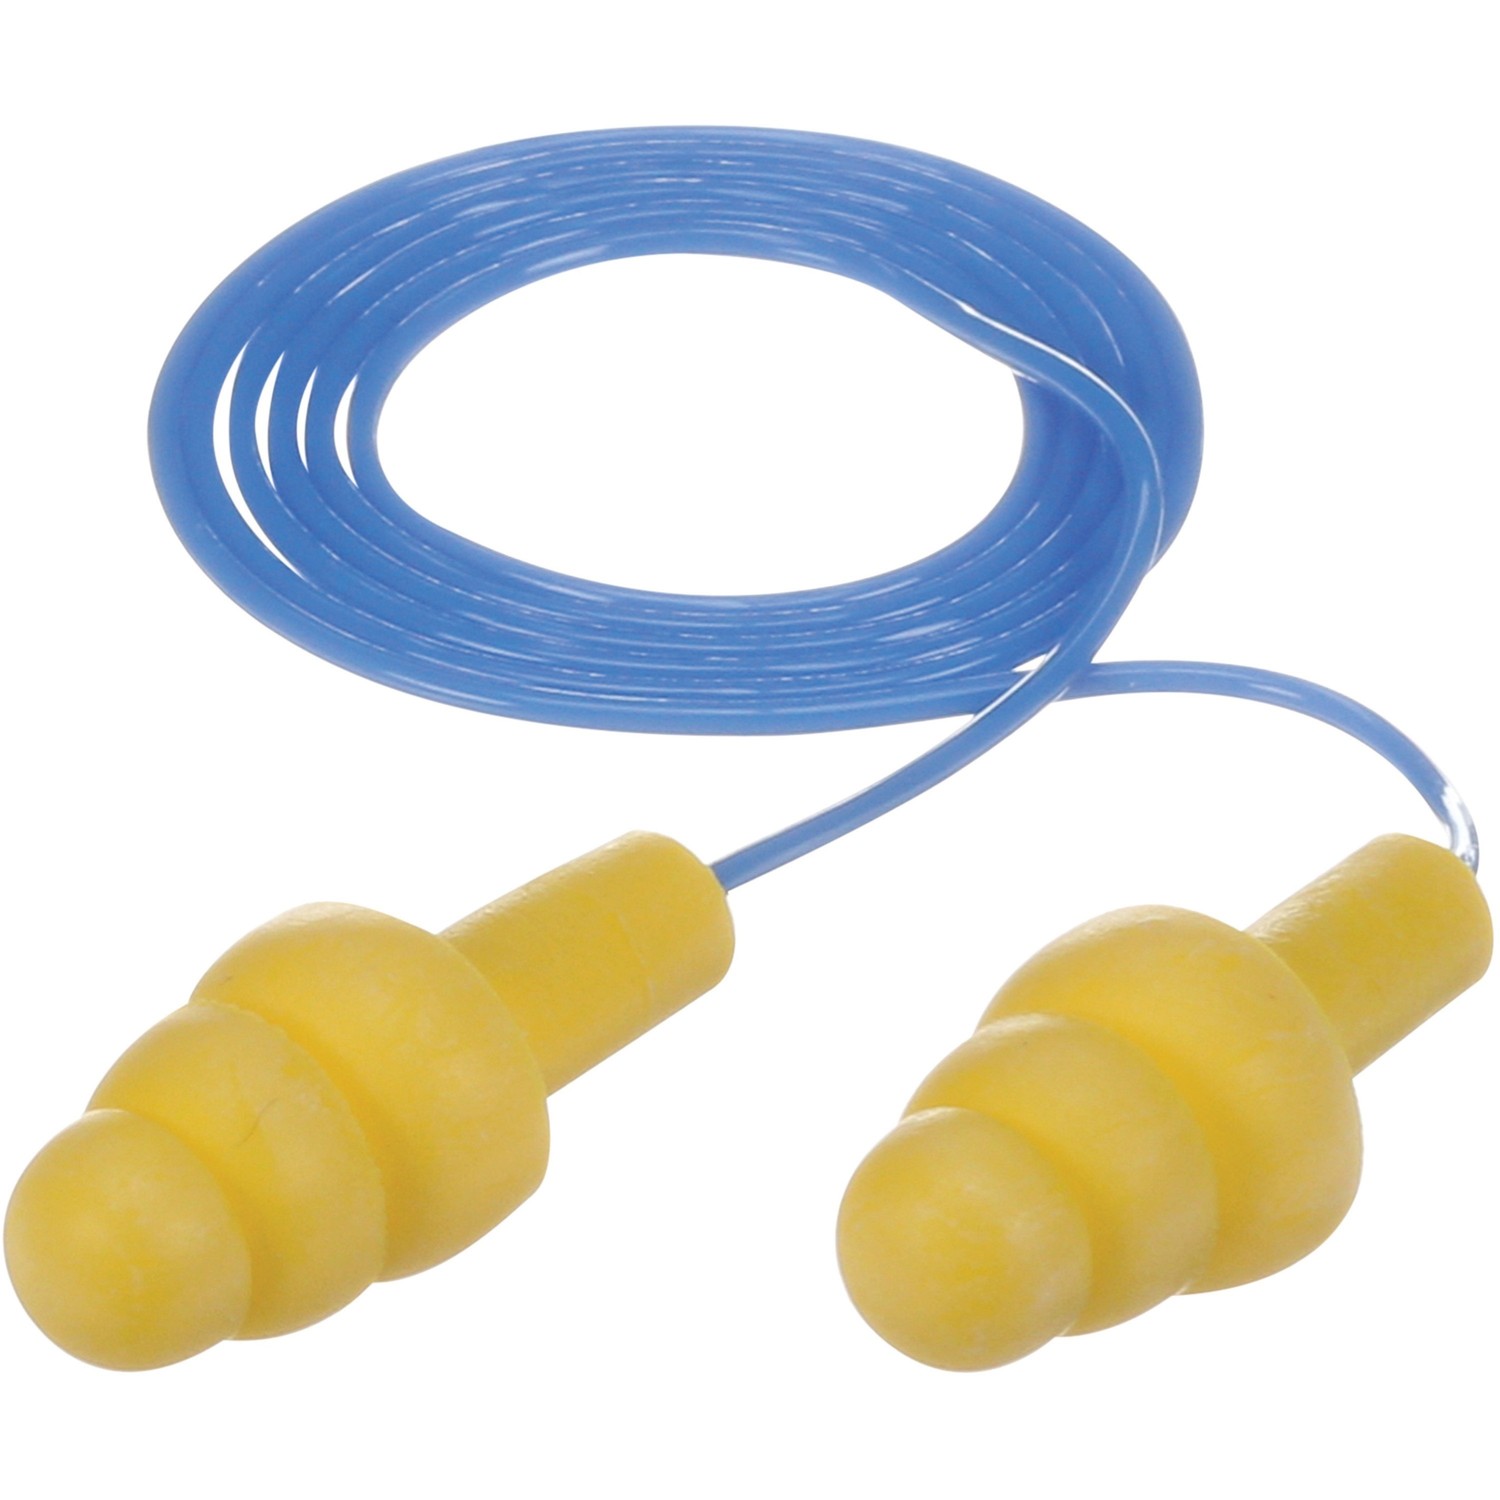 E-A-R UltraFit Corded Earplugs - Comfortable, Reusable, Washable, Dielectric, Disposable - Noise, Blast Protection - Polymer - Y